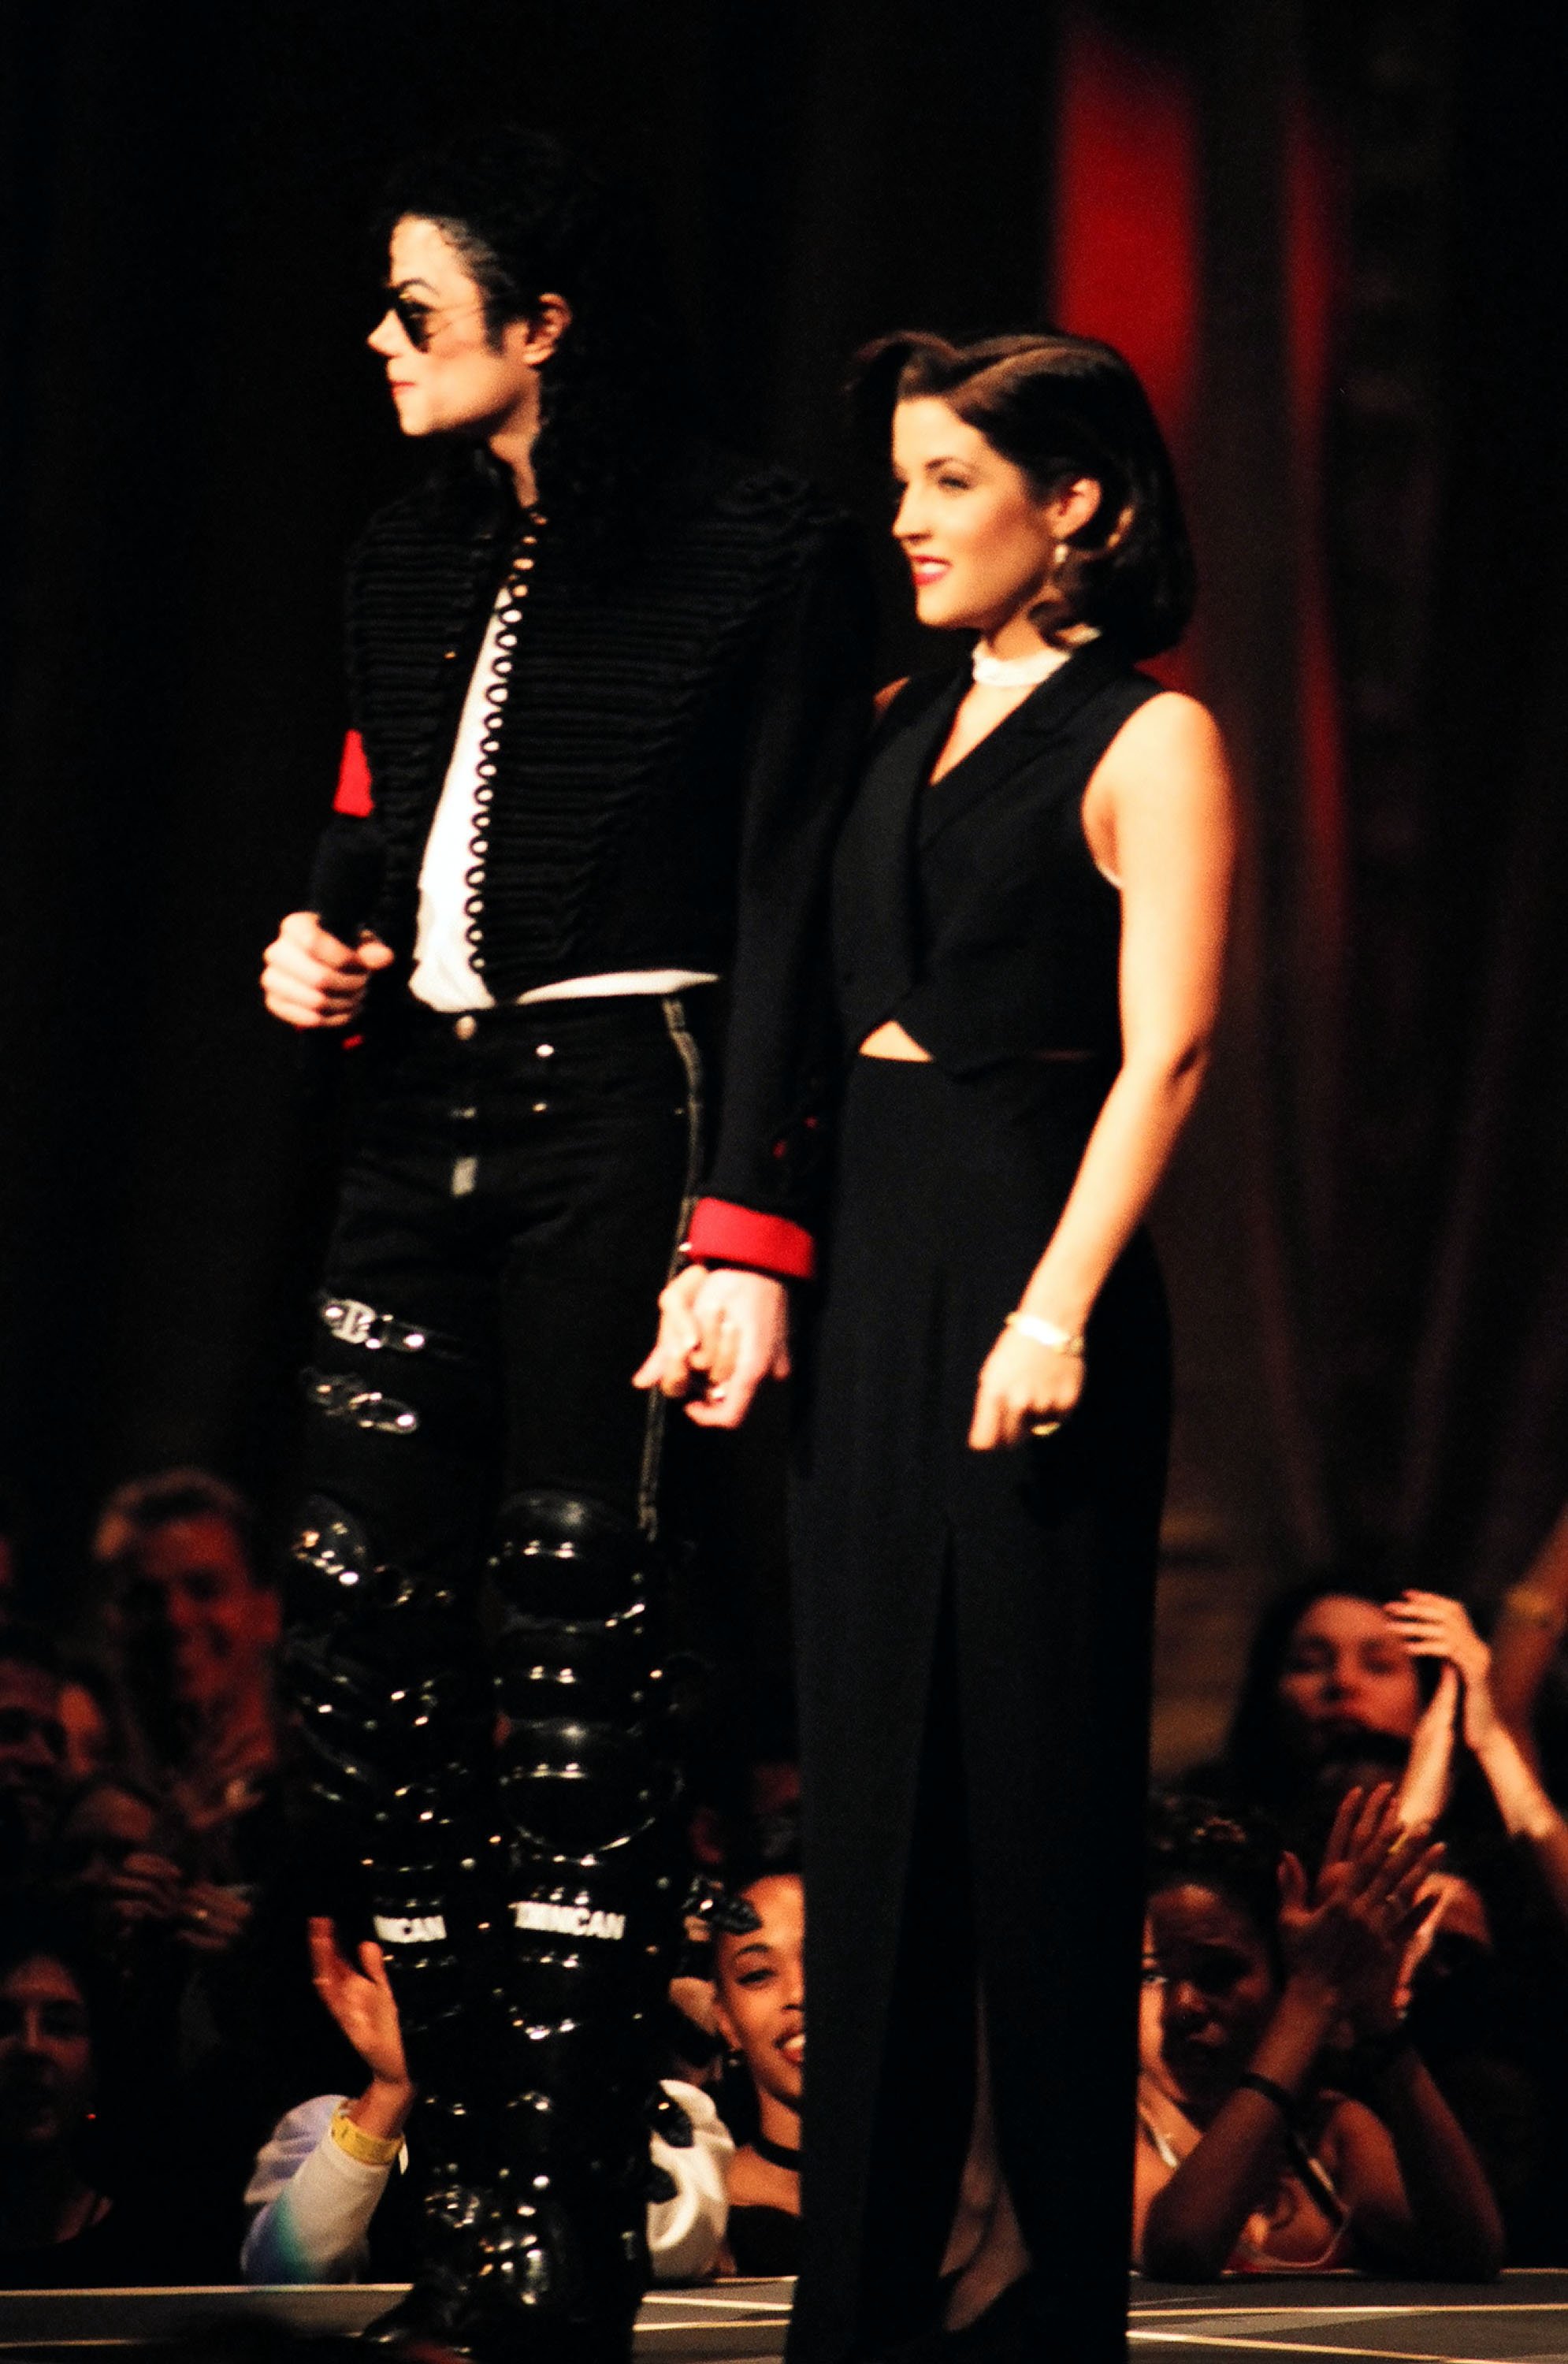 Michael Jackson and Lisa Marie Presley during 1994 MTV Video Music Awards at Radio City Music Hall in New York City, New York, United States. | Source: Getty Images